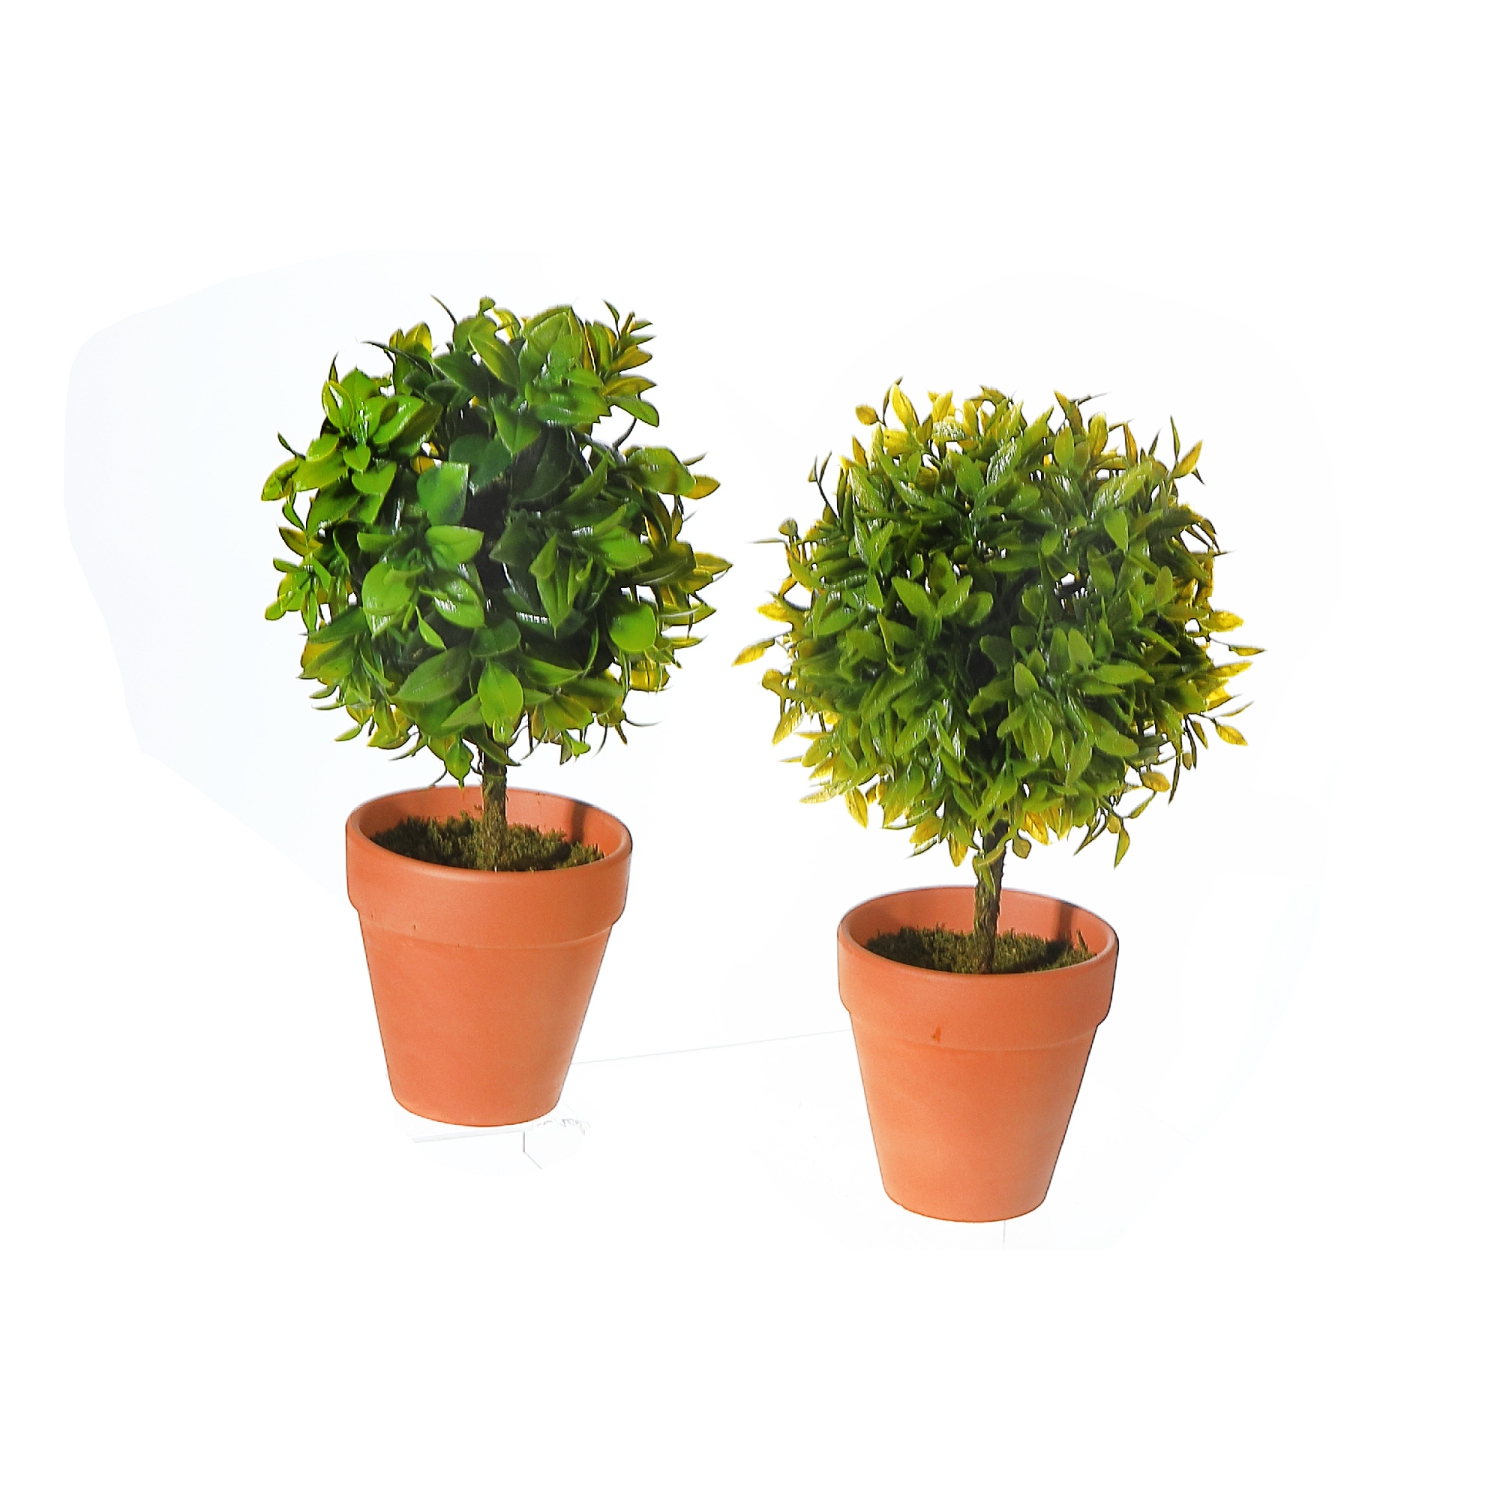 Maison Concepts Artificial Topiary Ball Plant In Clay Pot Asstd - Set of 2